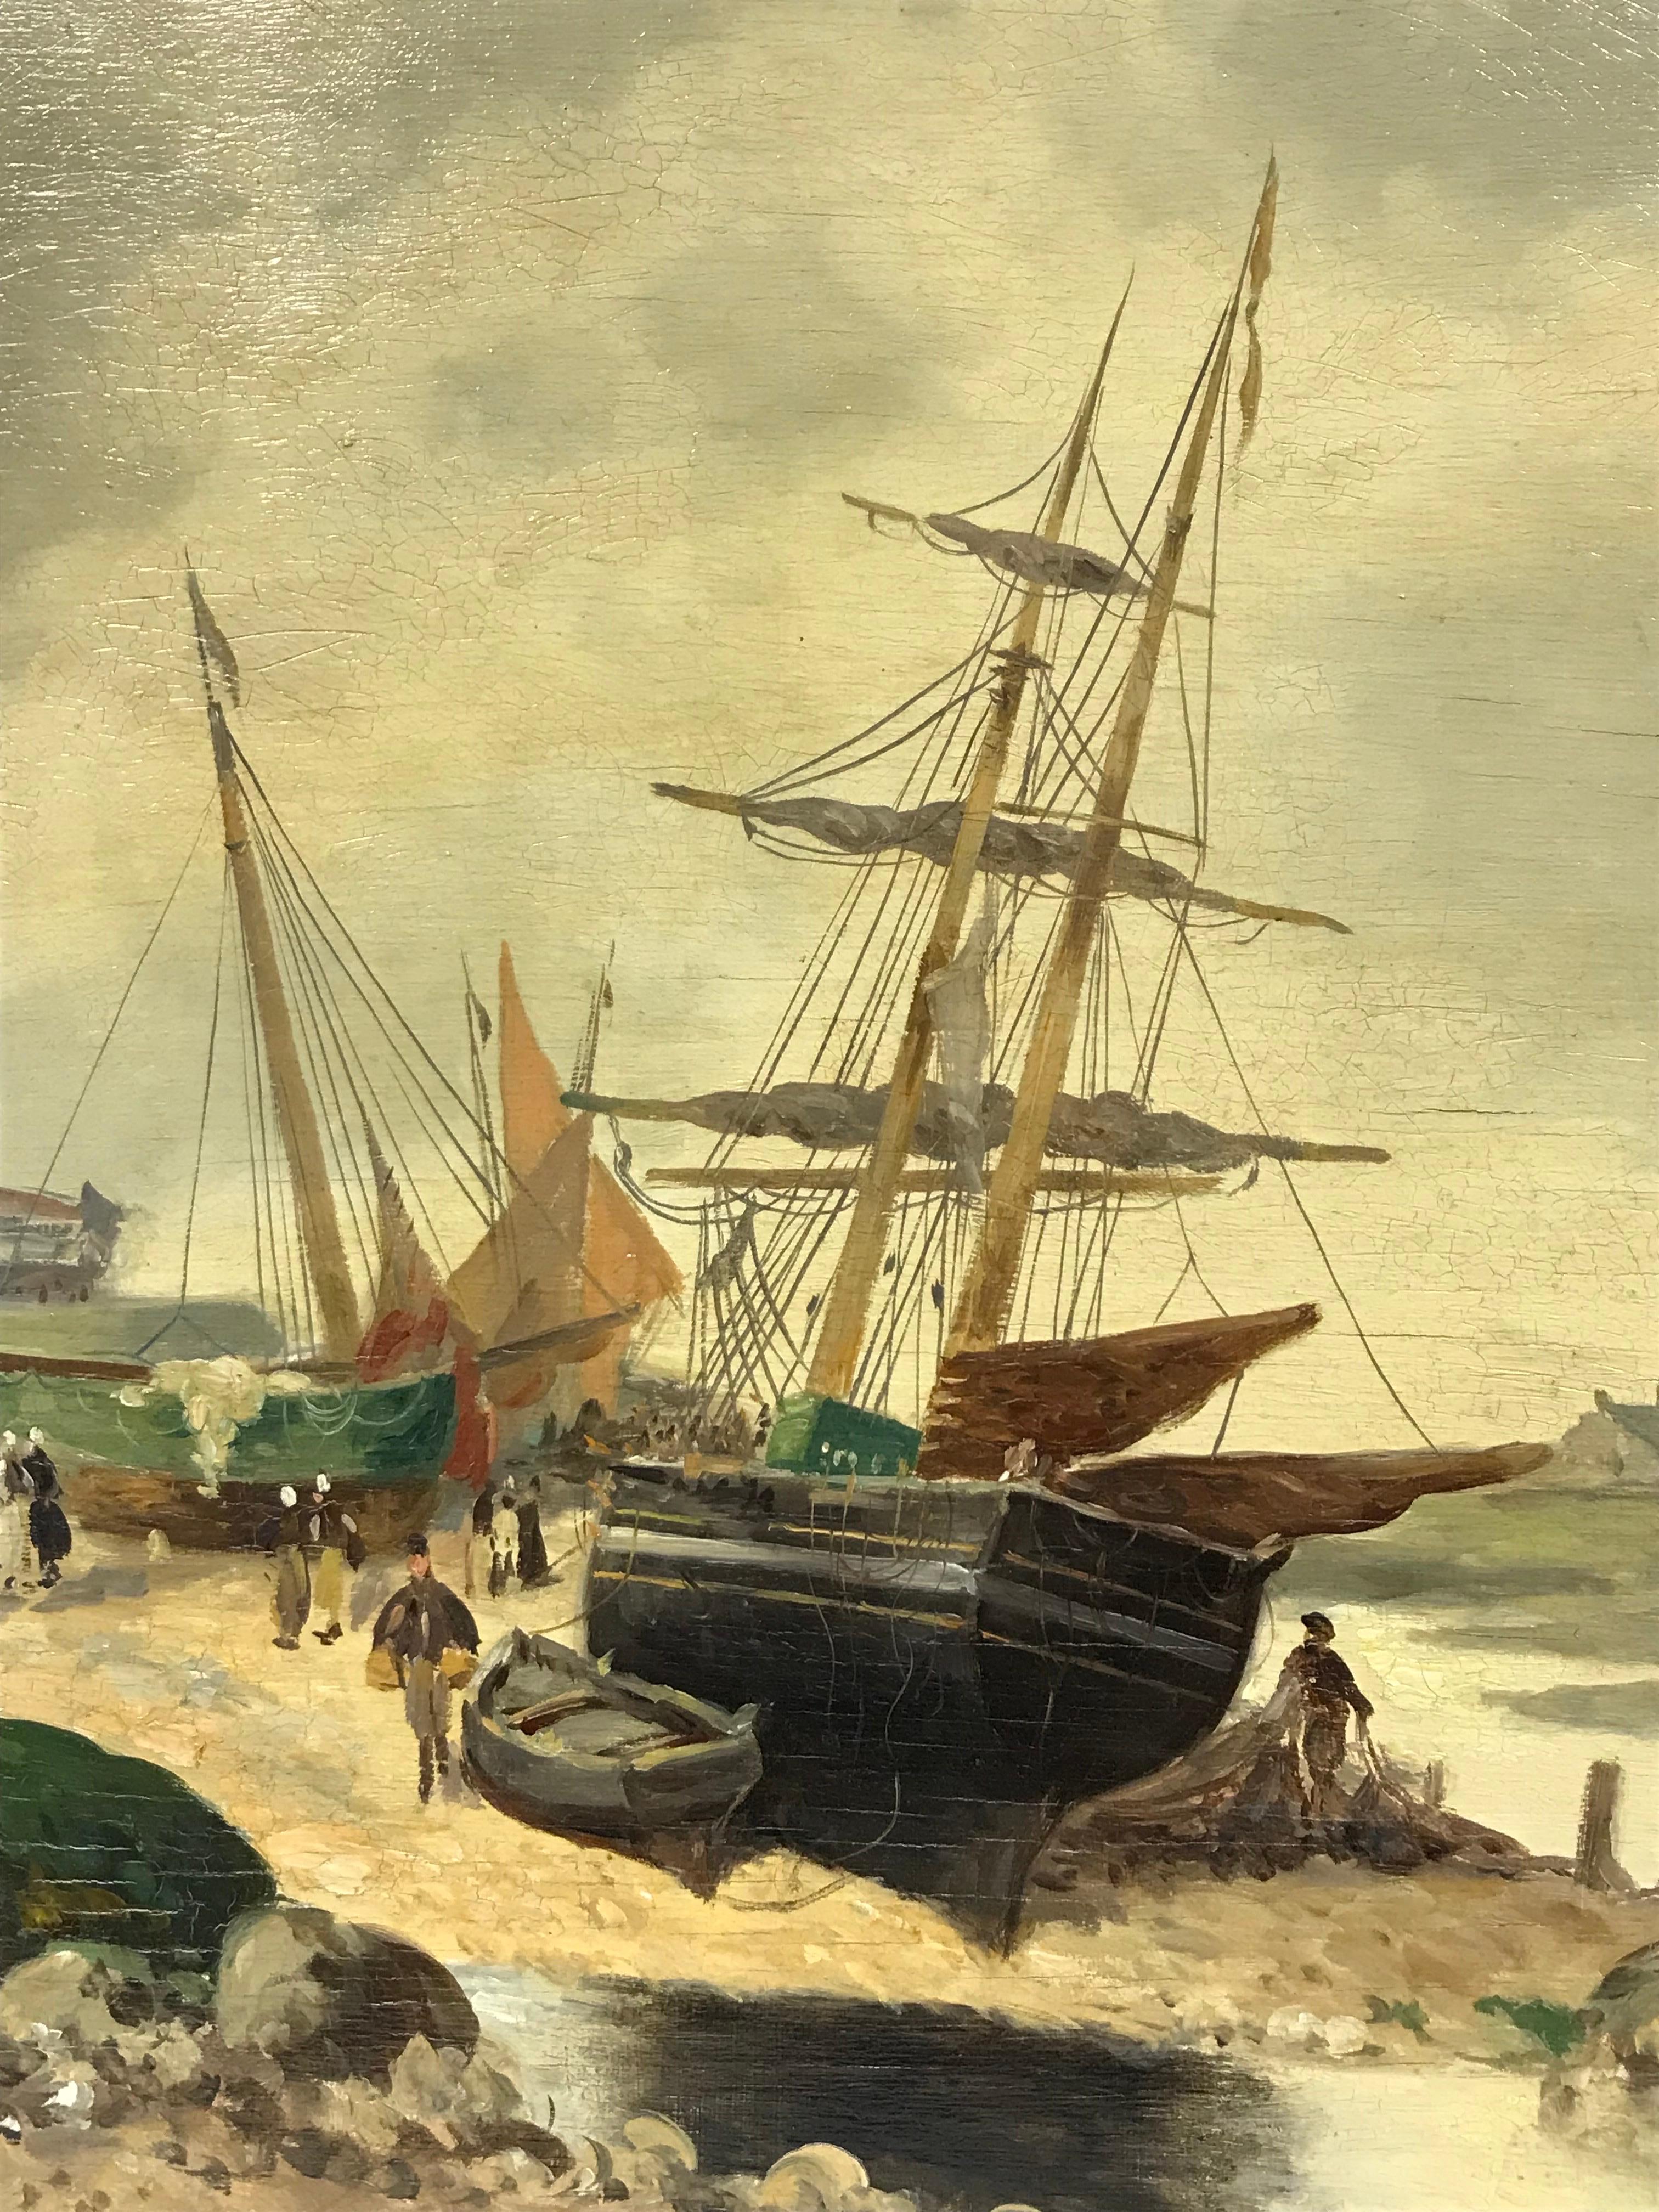 Artist/ School: French School, early 20th century, signed

Title: French harbour scene, with many figures around the fishing boats bringing in the catch. 

Medium: oil painting on board, unframed, signed

Size:

board : 18 x 25.5 inches

Provenance: